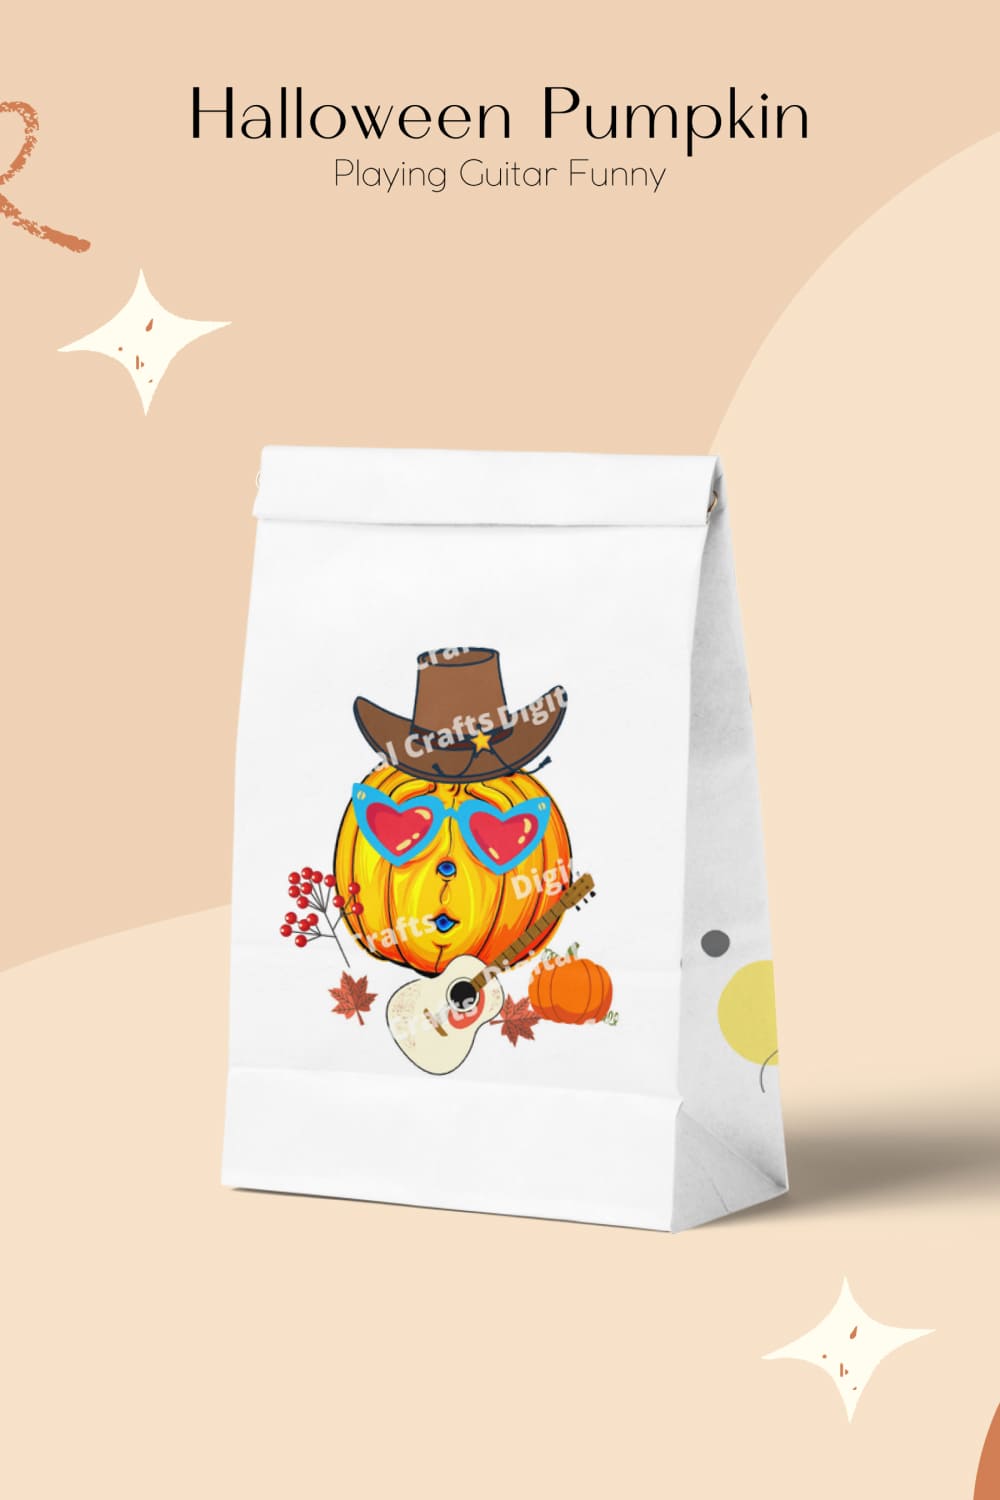 Image of a paper bag with an adorable print of a pumpkin in a cowboy hat with a guitar.